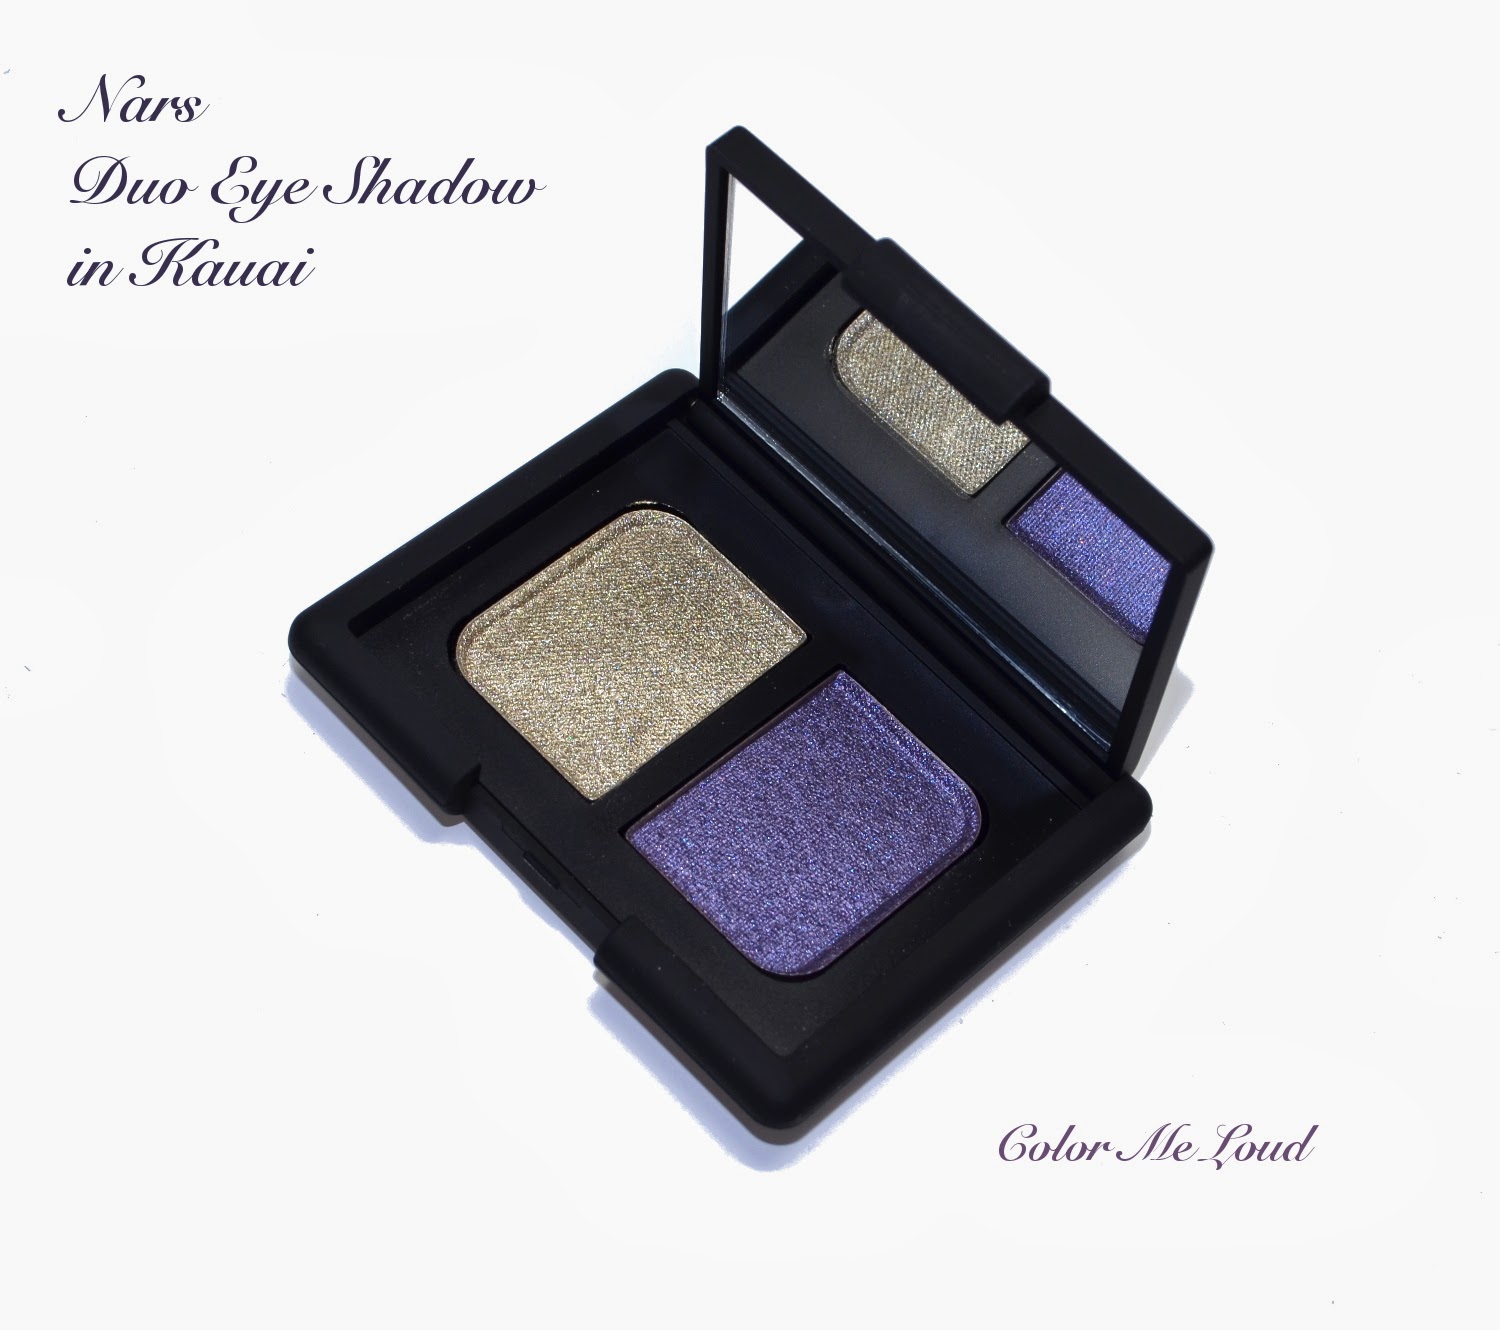 Nars Duo Eyeshadow in Kauai for Spring 2014 Color Collection